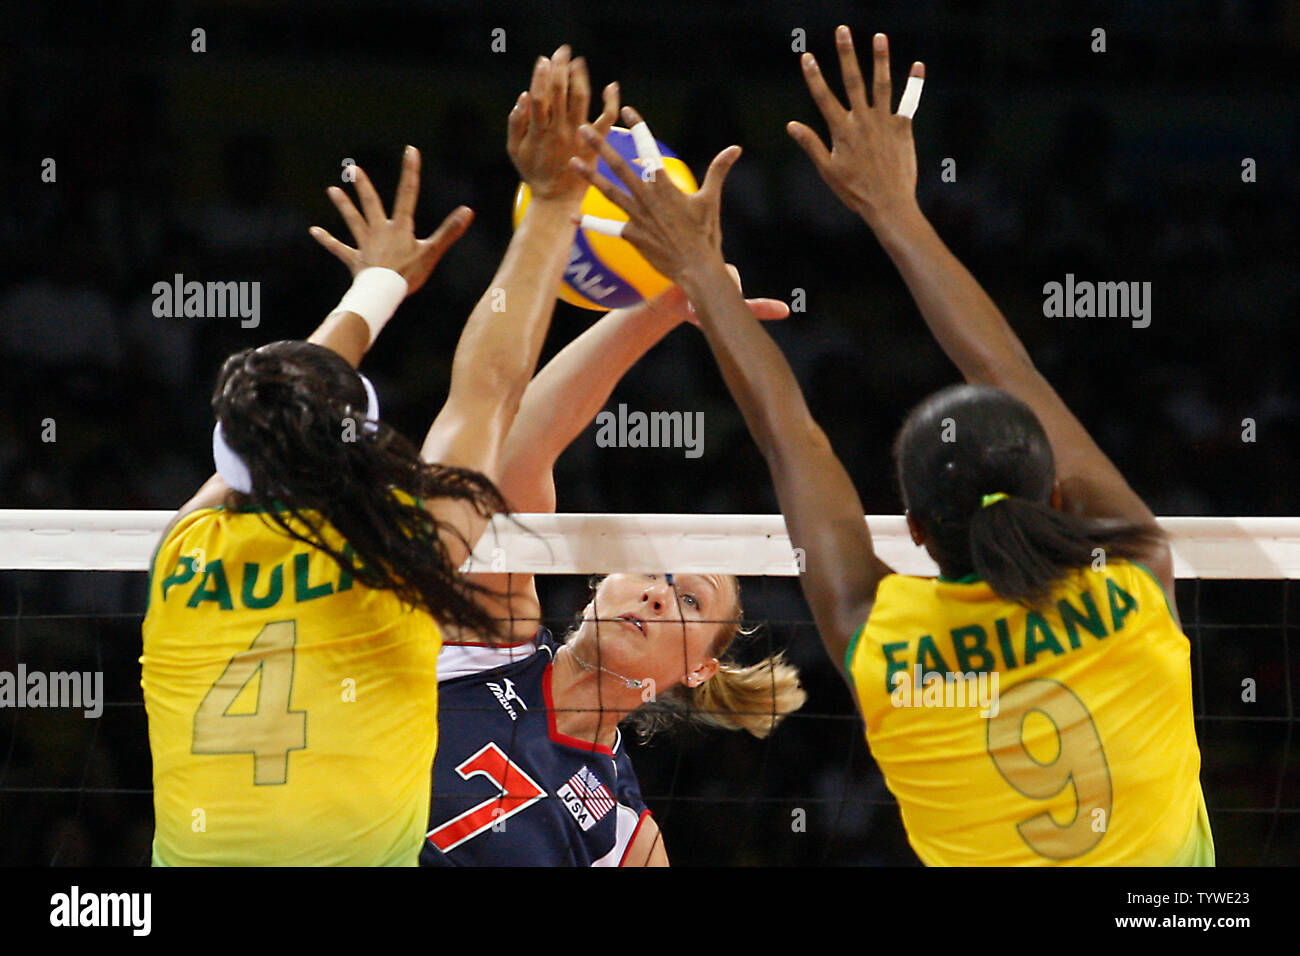 USA's Heather Bown's (C) spike attempt is blocked by Brazil's Paula Pequeno (L) and teammate Fabiana Claudion in the women's volleyball final during the Beijing 2008 Olympic Games August 23, 2008. Brazil won the match 3-1, taking the gold, while USA settled for silver and China the bronze.  (UPI Photo/Stephen Shaver) Stock Photo